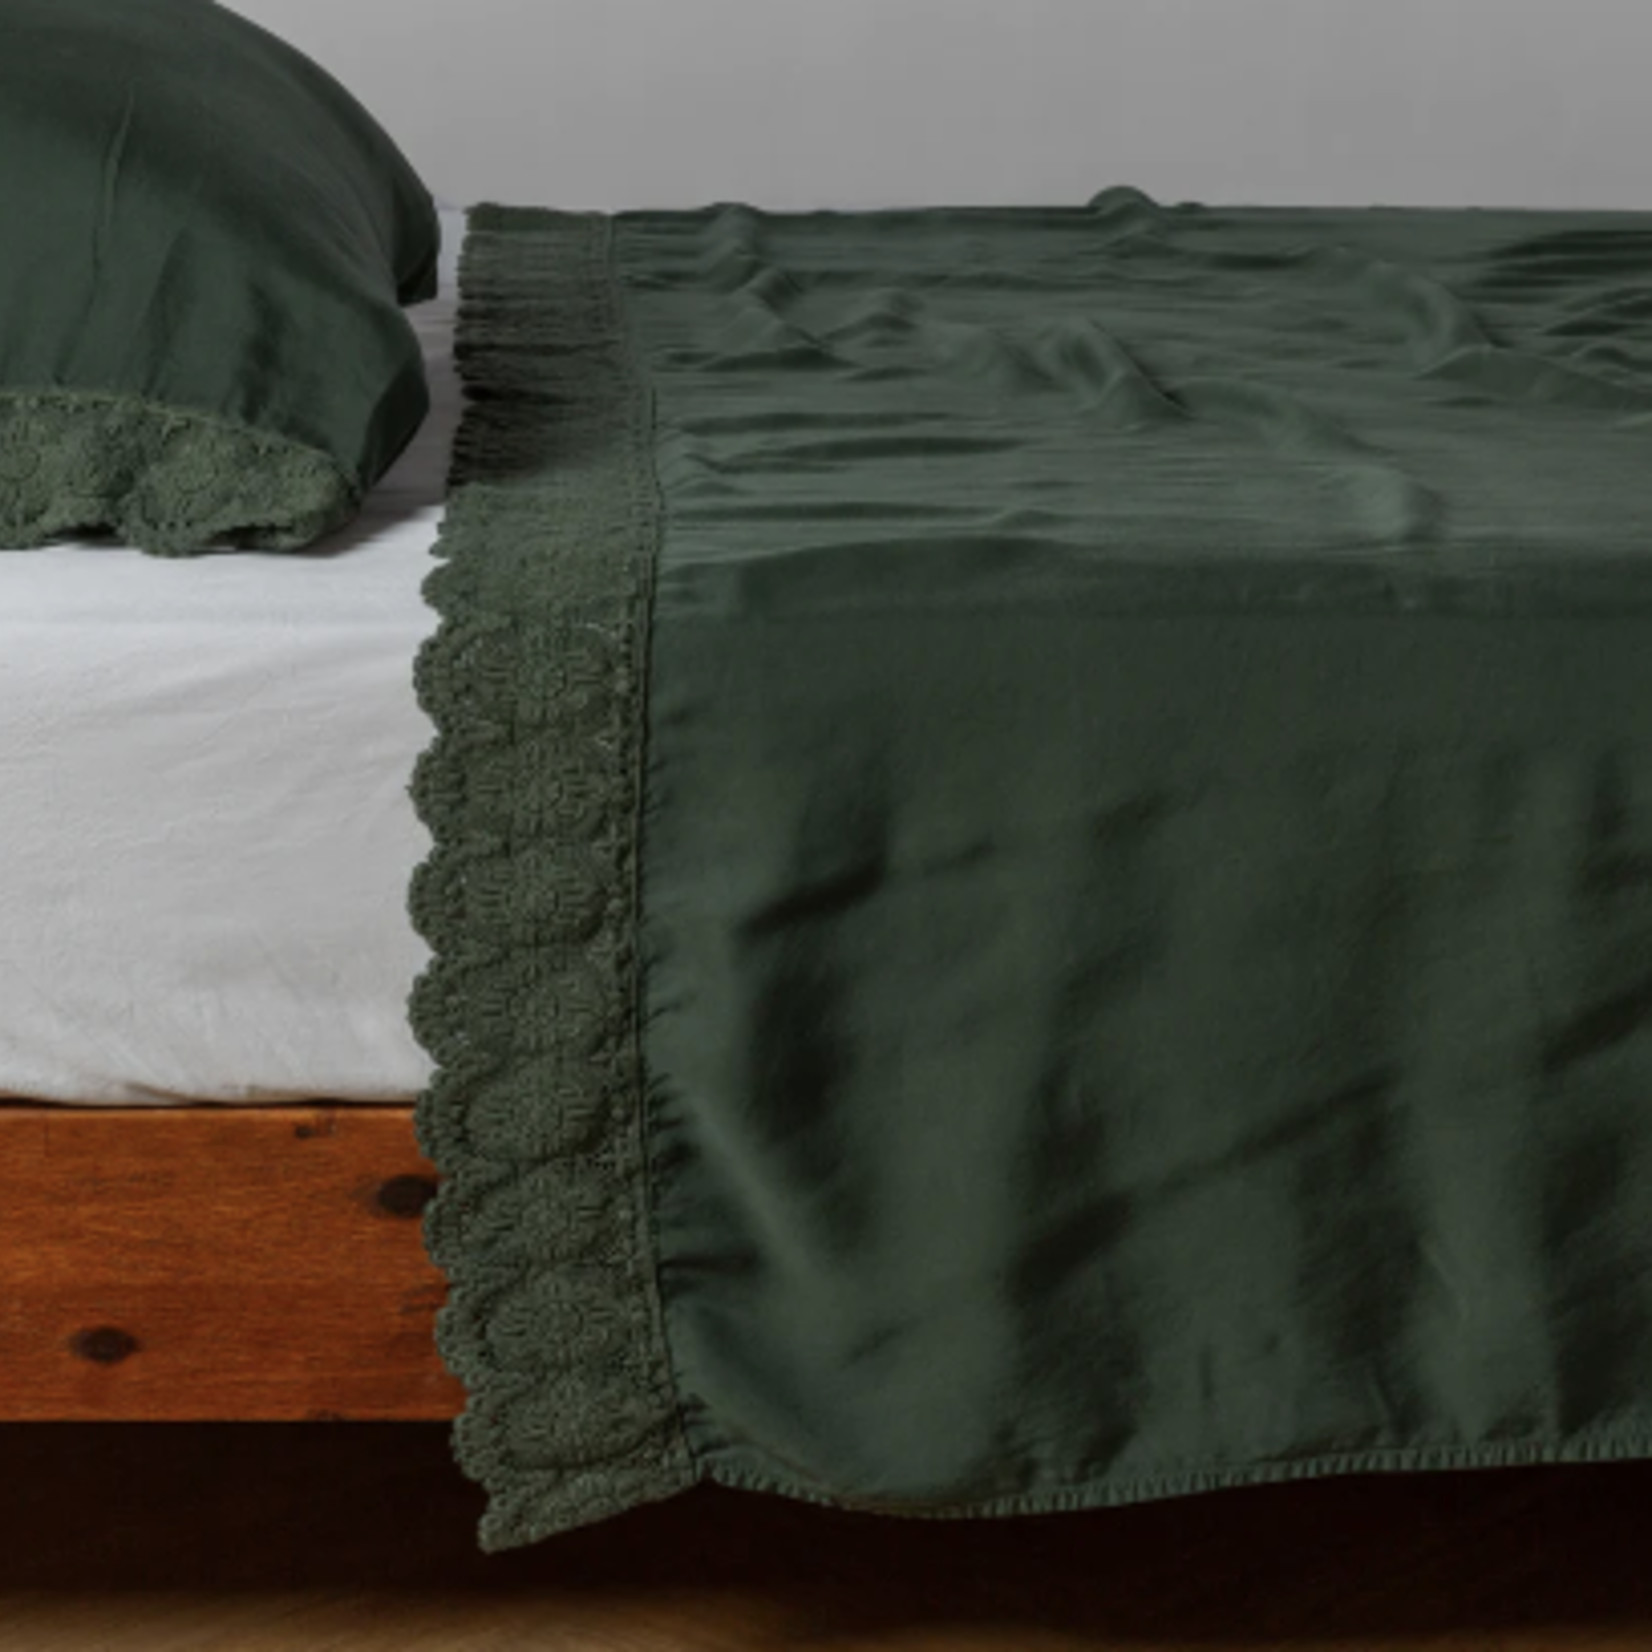 Bella Notte Madera Luxe Pillowcase with Donella Lace